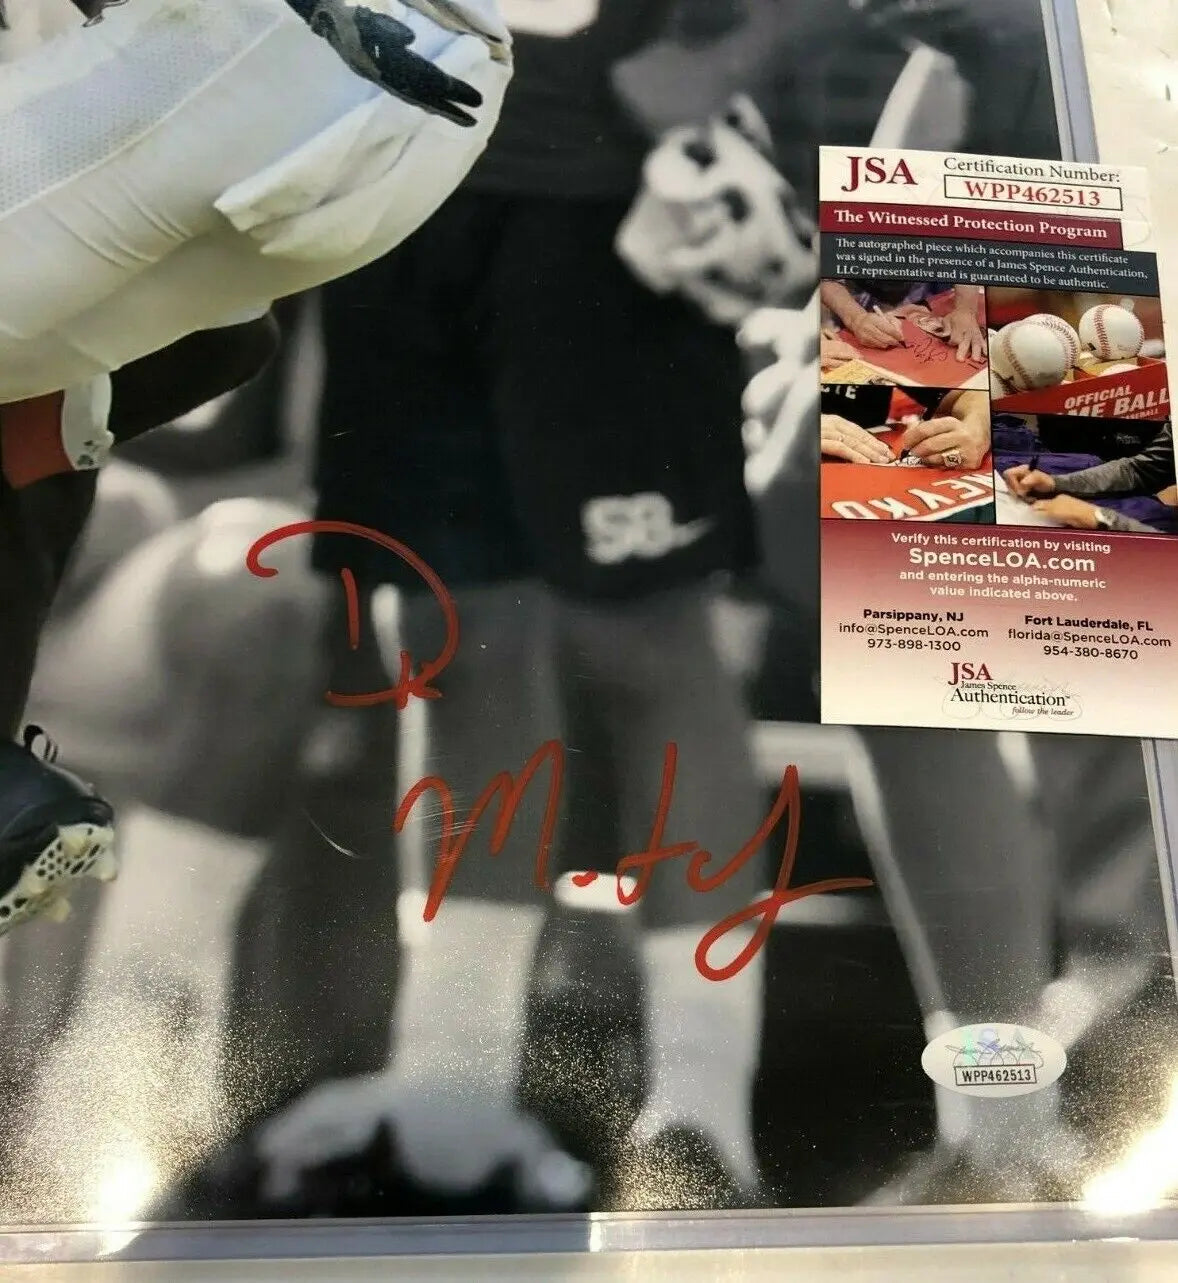 MVP Authentics Ole Miss Rebels Dk Metcalf Autographed Signed 16X20 Photo Jsa  Coa 116.10 sports jersey framing , jersey framing